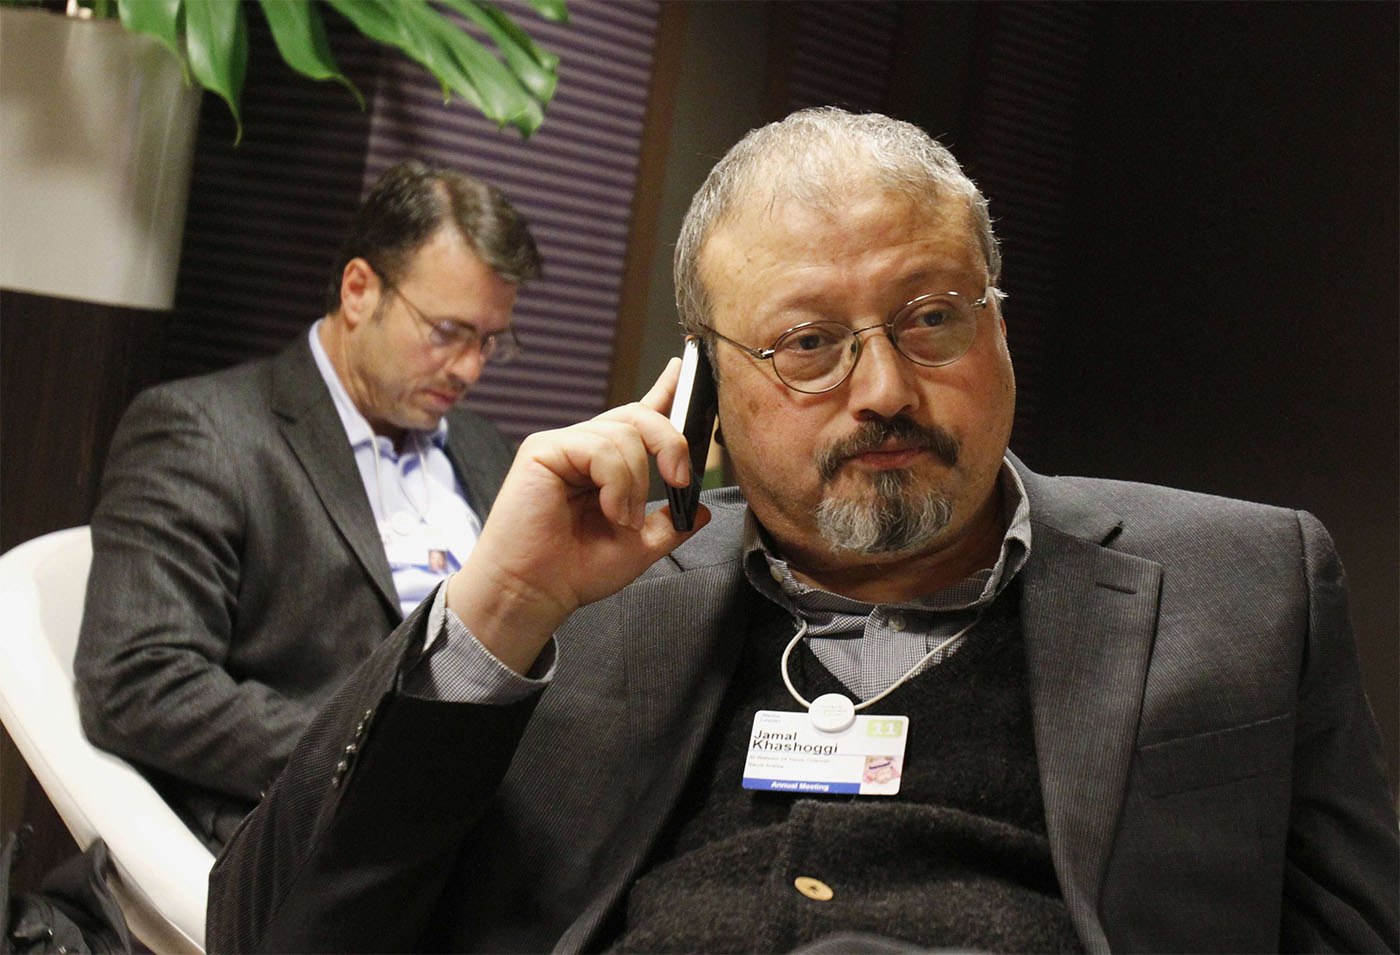 Khashoggi was killed in the Saudi consulate in Istanbul on Oct. 2 after a struggle by lethal injection